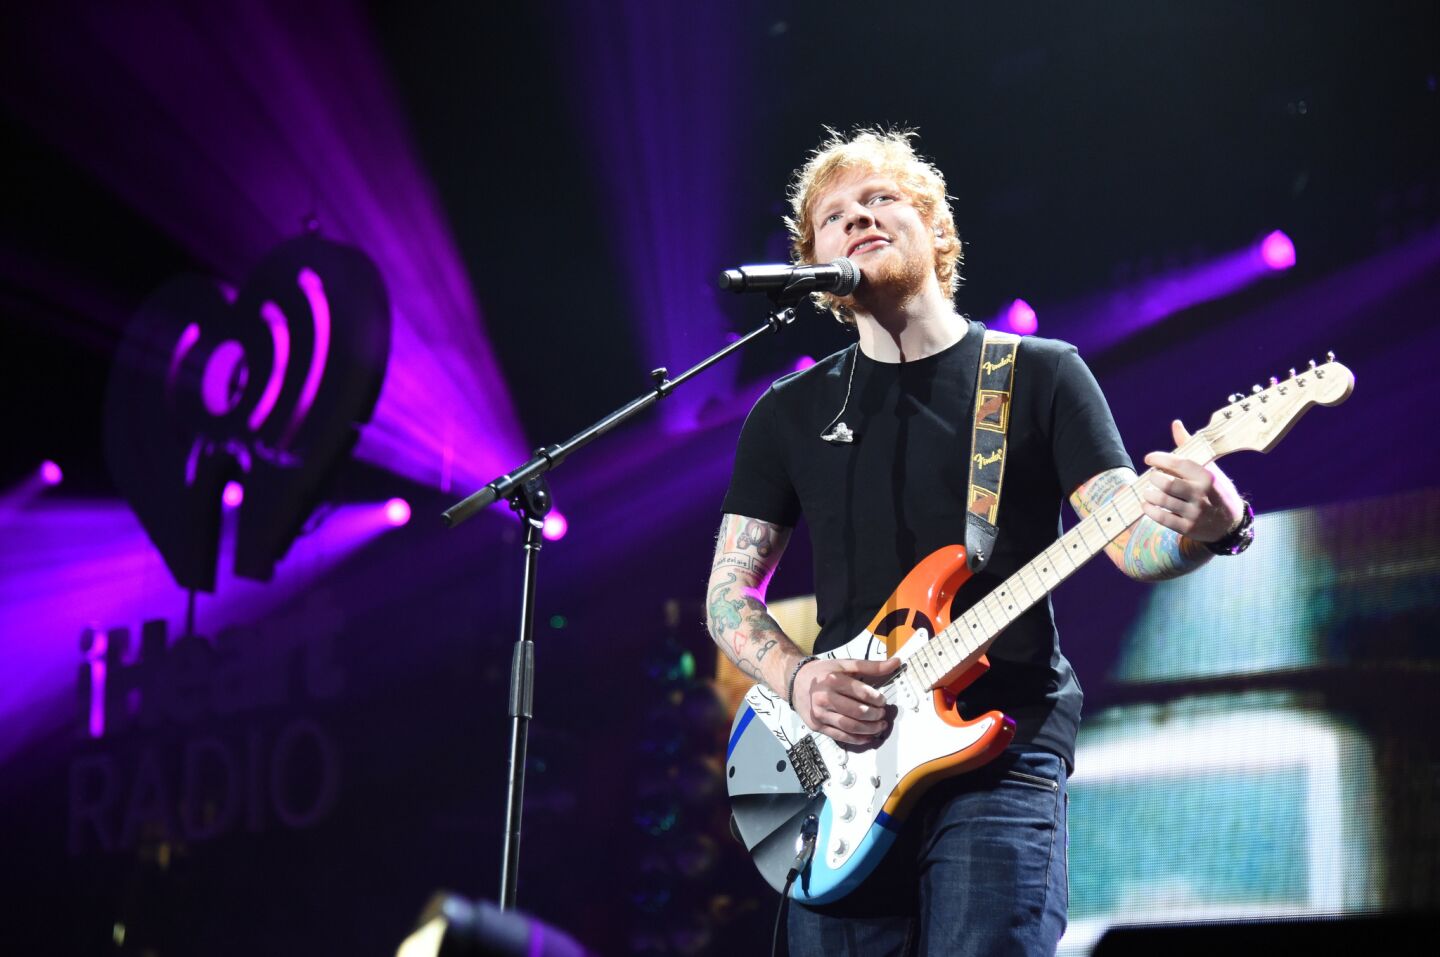 Ed Sheeran, who will perform during the live telecast, holds three nominations: album of the year, pop vocal album and song written for visual media.